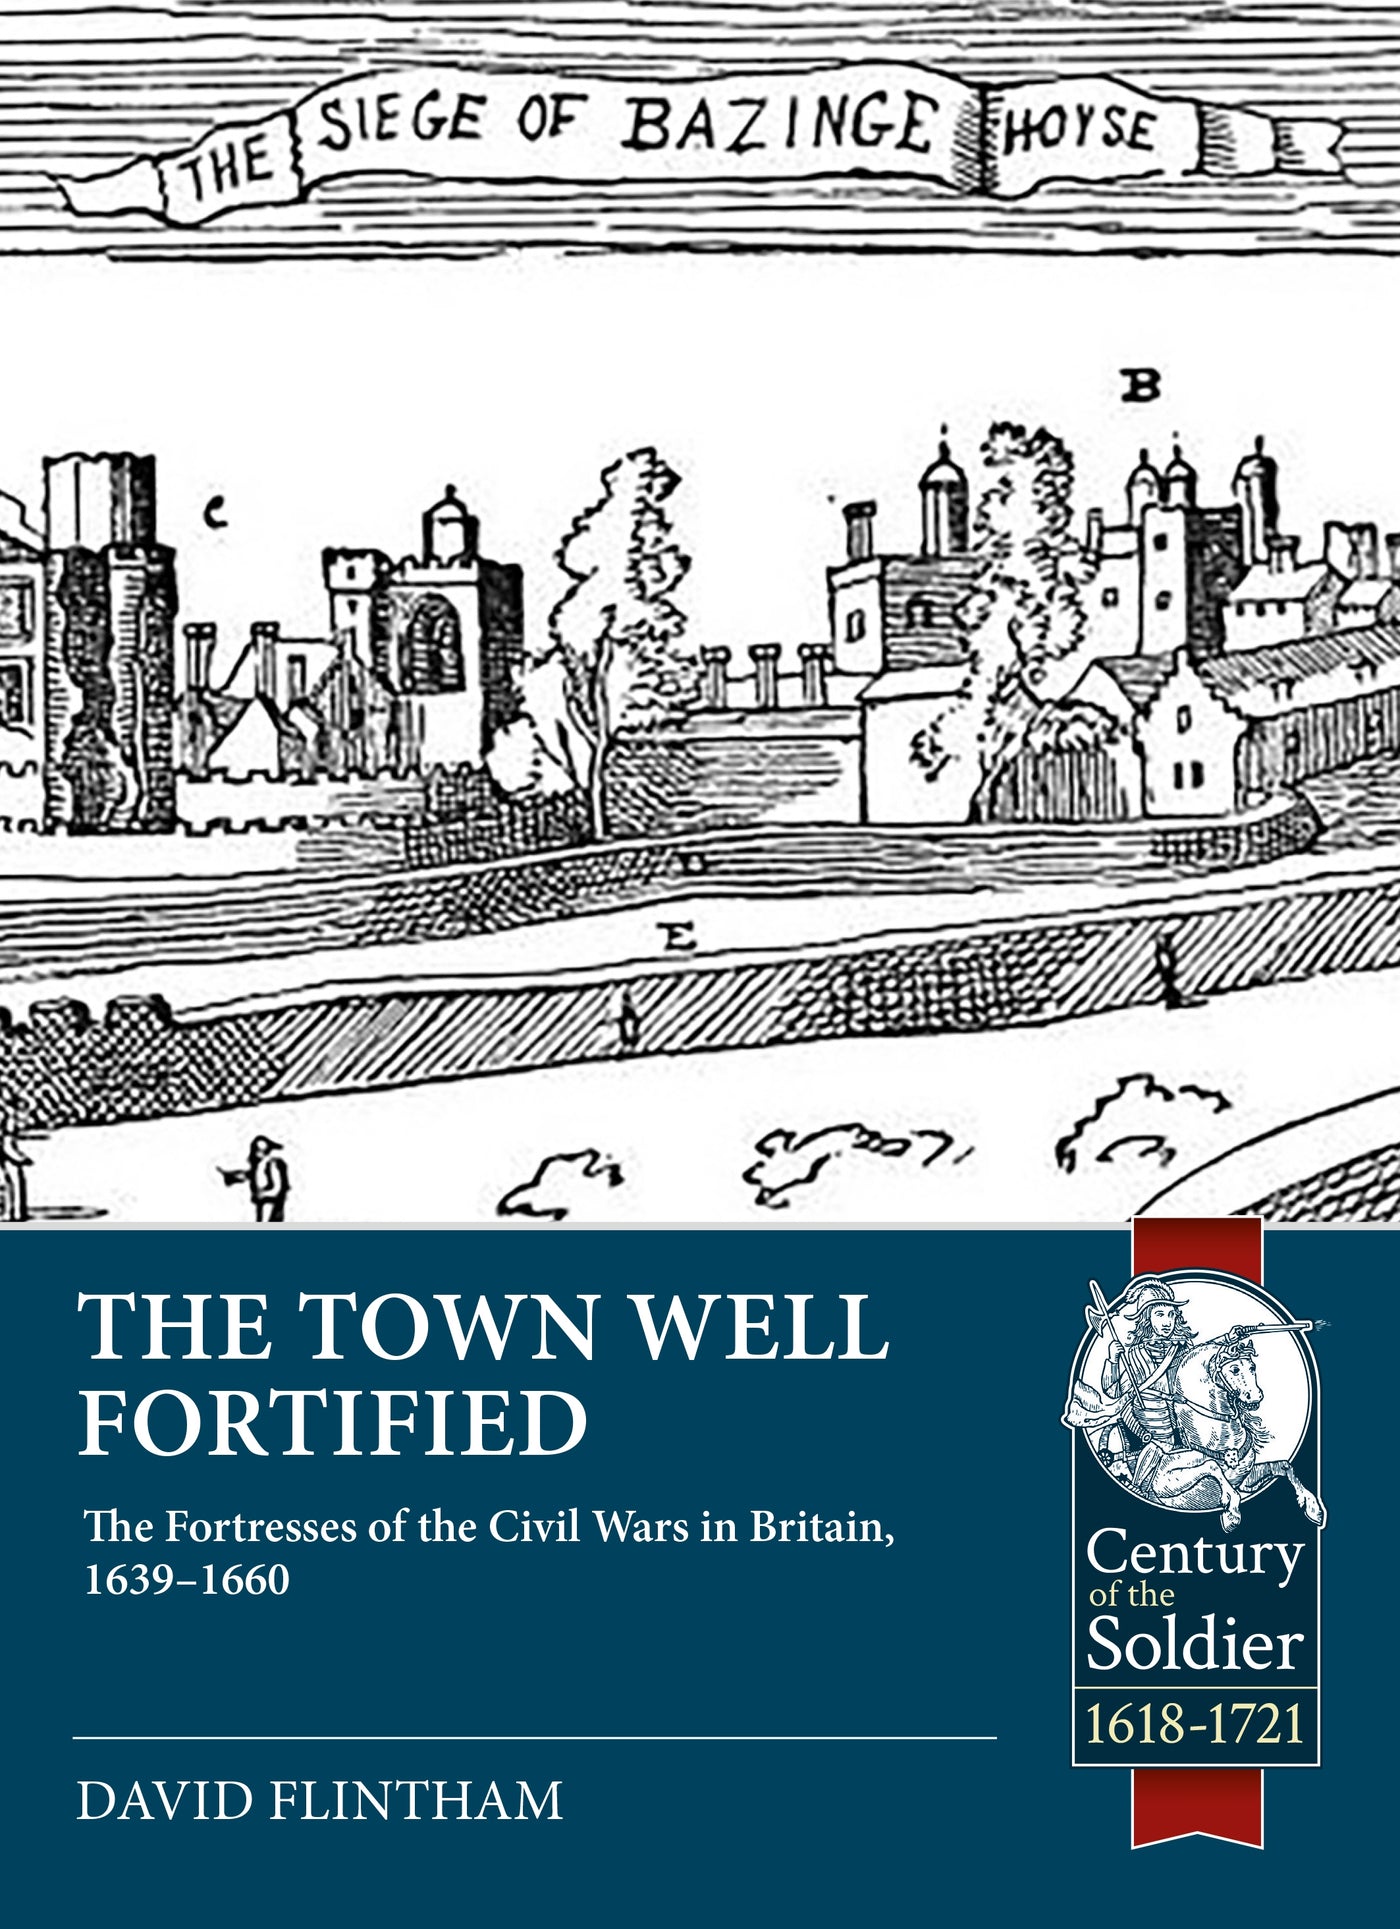 The Town Well Fortified